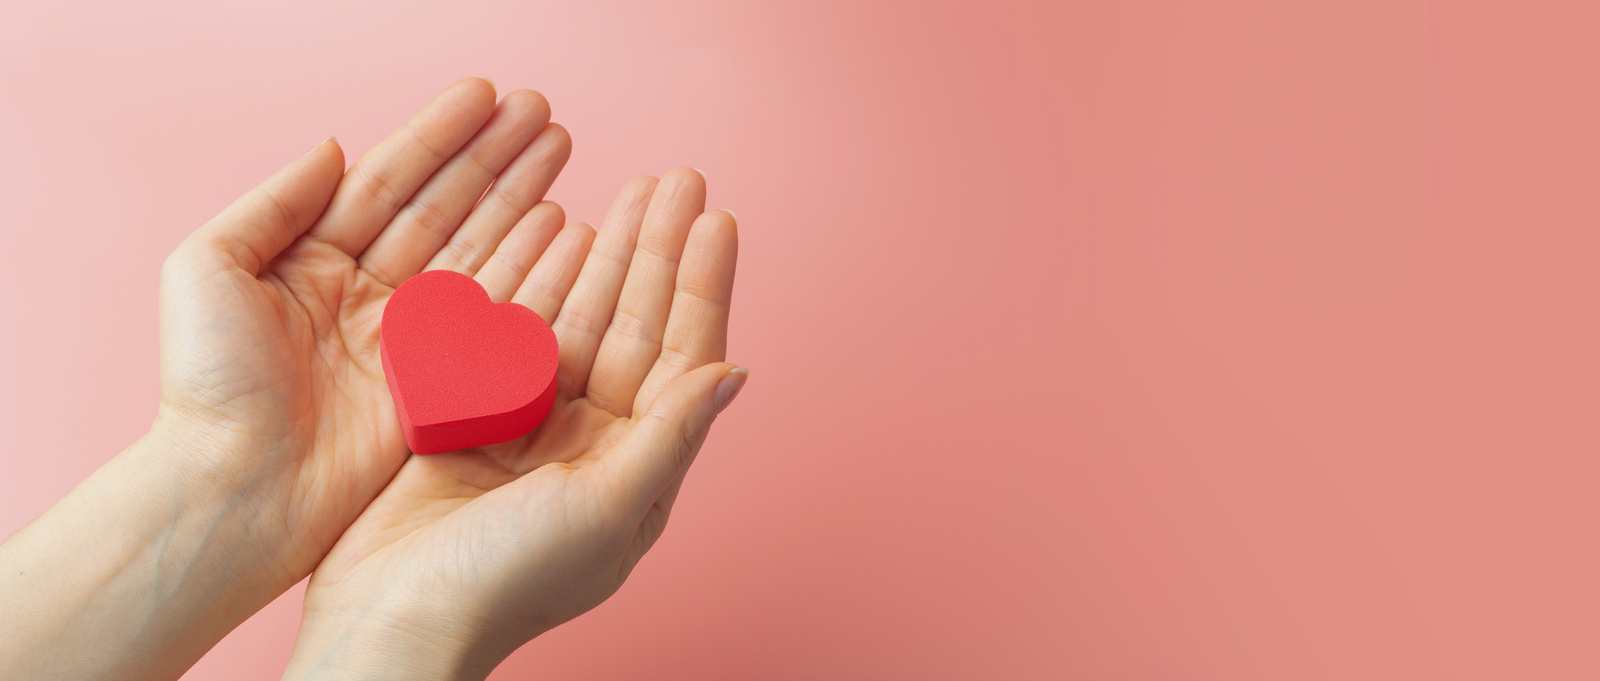 Heart in the hands of a female on a colored banner background. Donation, charity, health treatment, help concept. Background for Valentine's Day (February 14) and love.